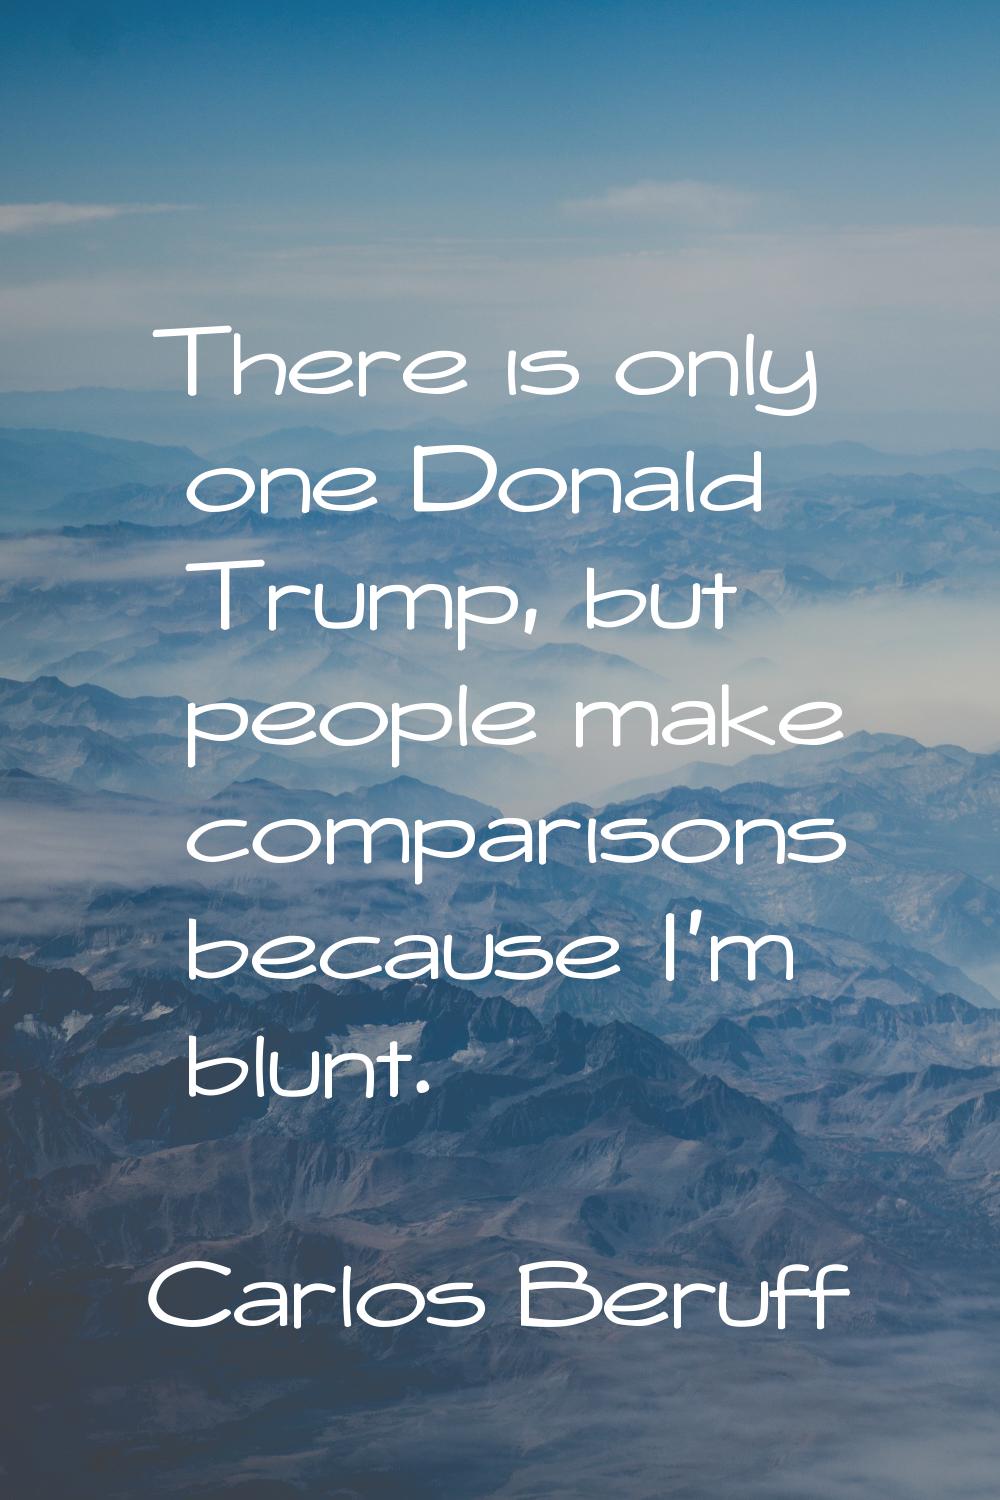 There is only one Donald Trump, but people make comparisons because I'm blunt.